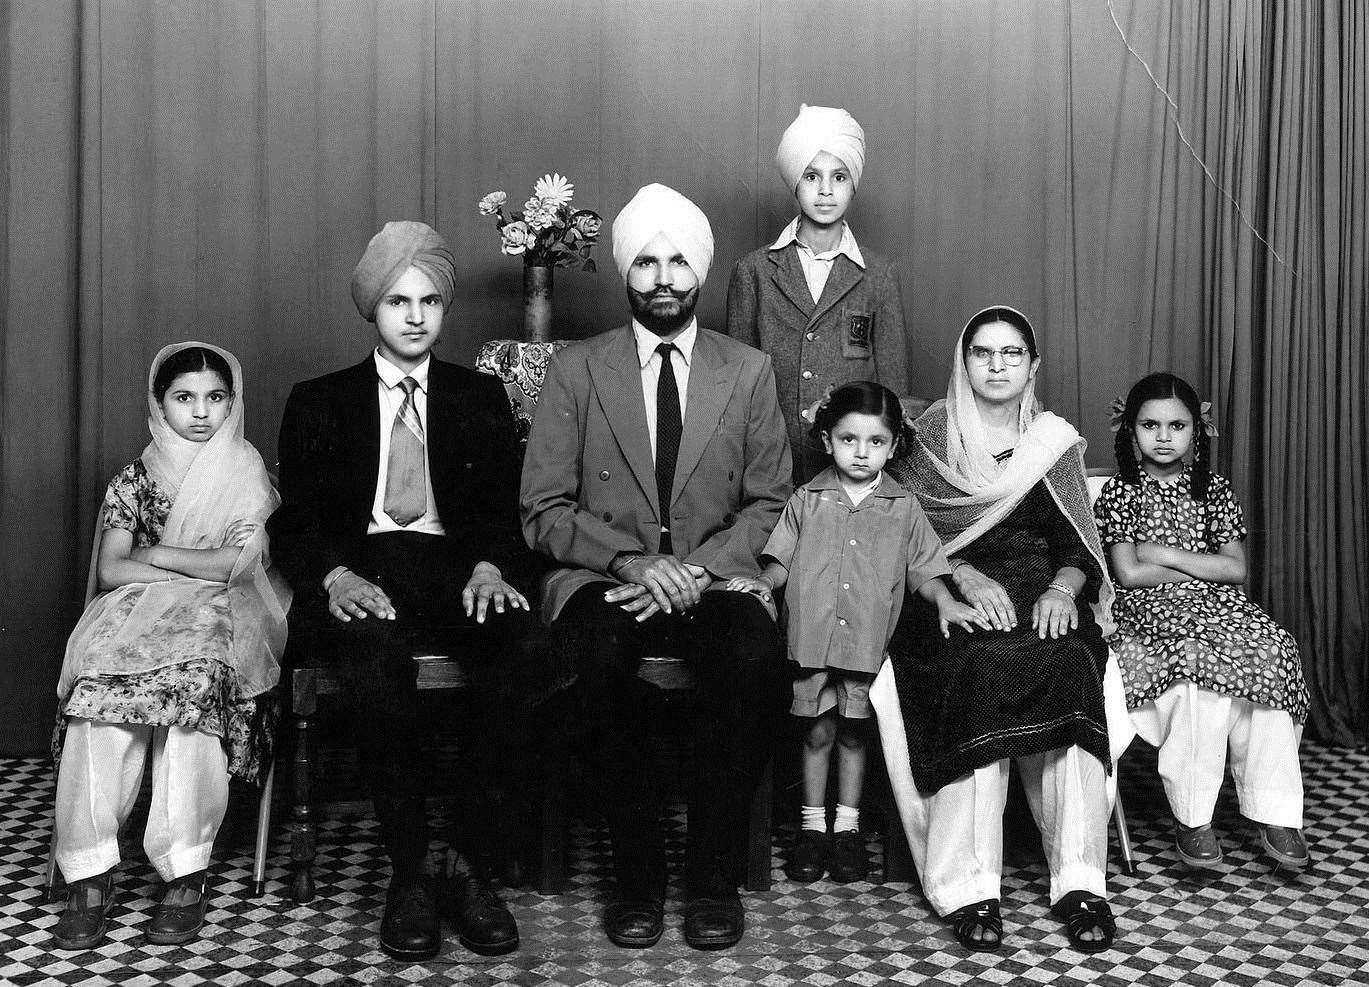 The Virdee family moved to England in 1963. Eldest child, Hardish is pictured second to left.